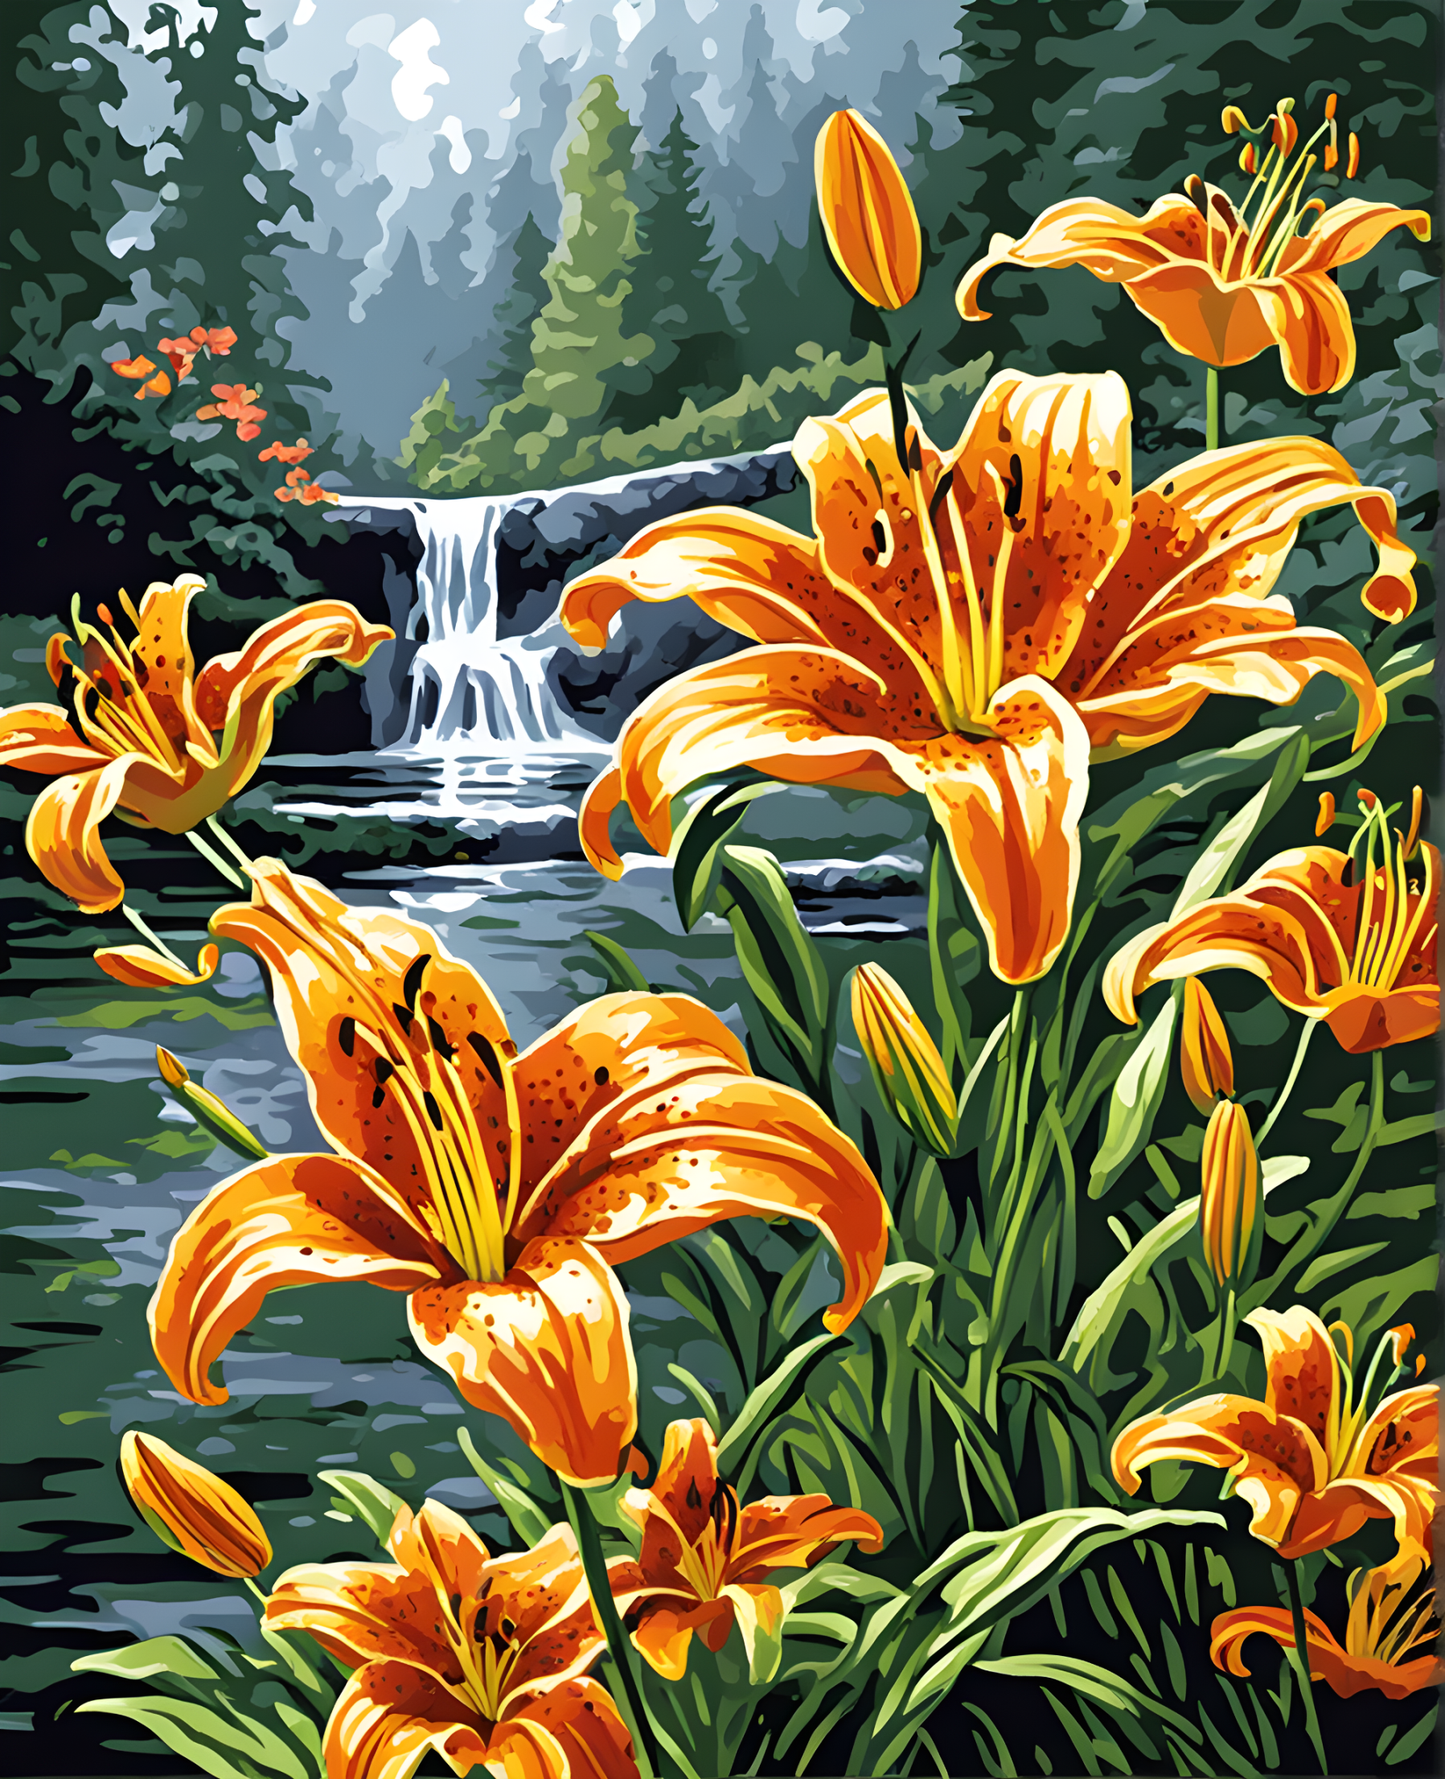 Flowers Collection OD (35) - Tiger Lily - Van-Go Paint-By-Number Kit